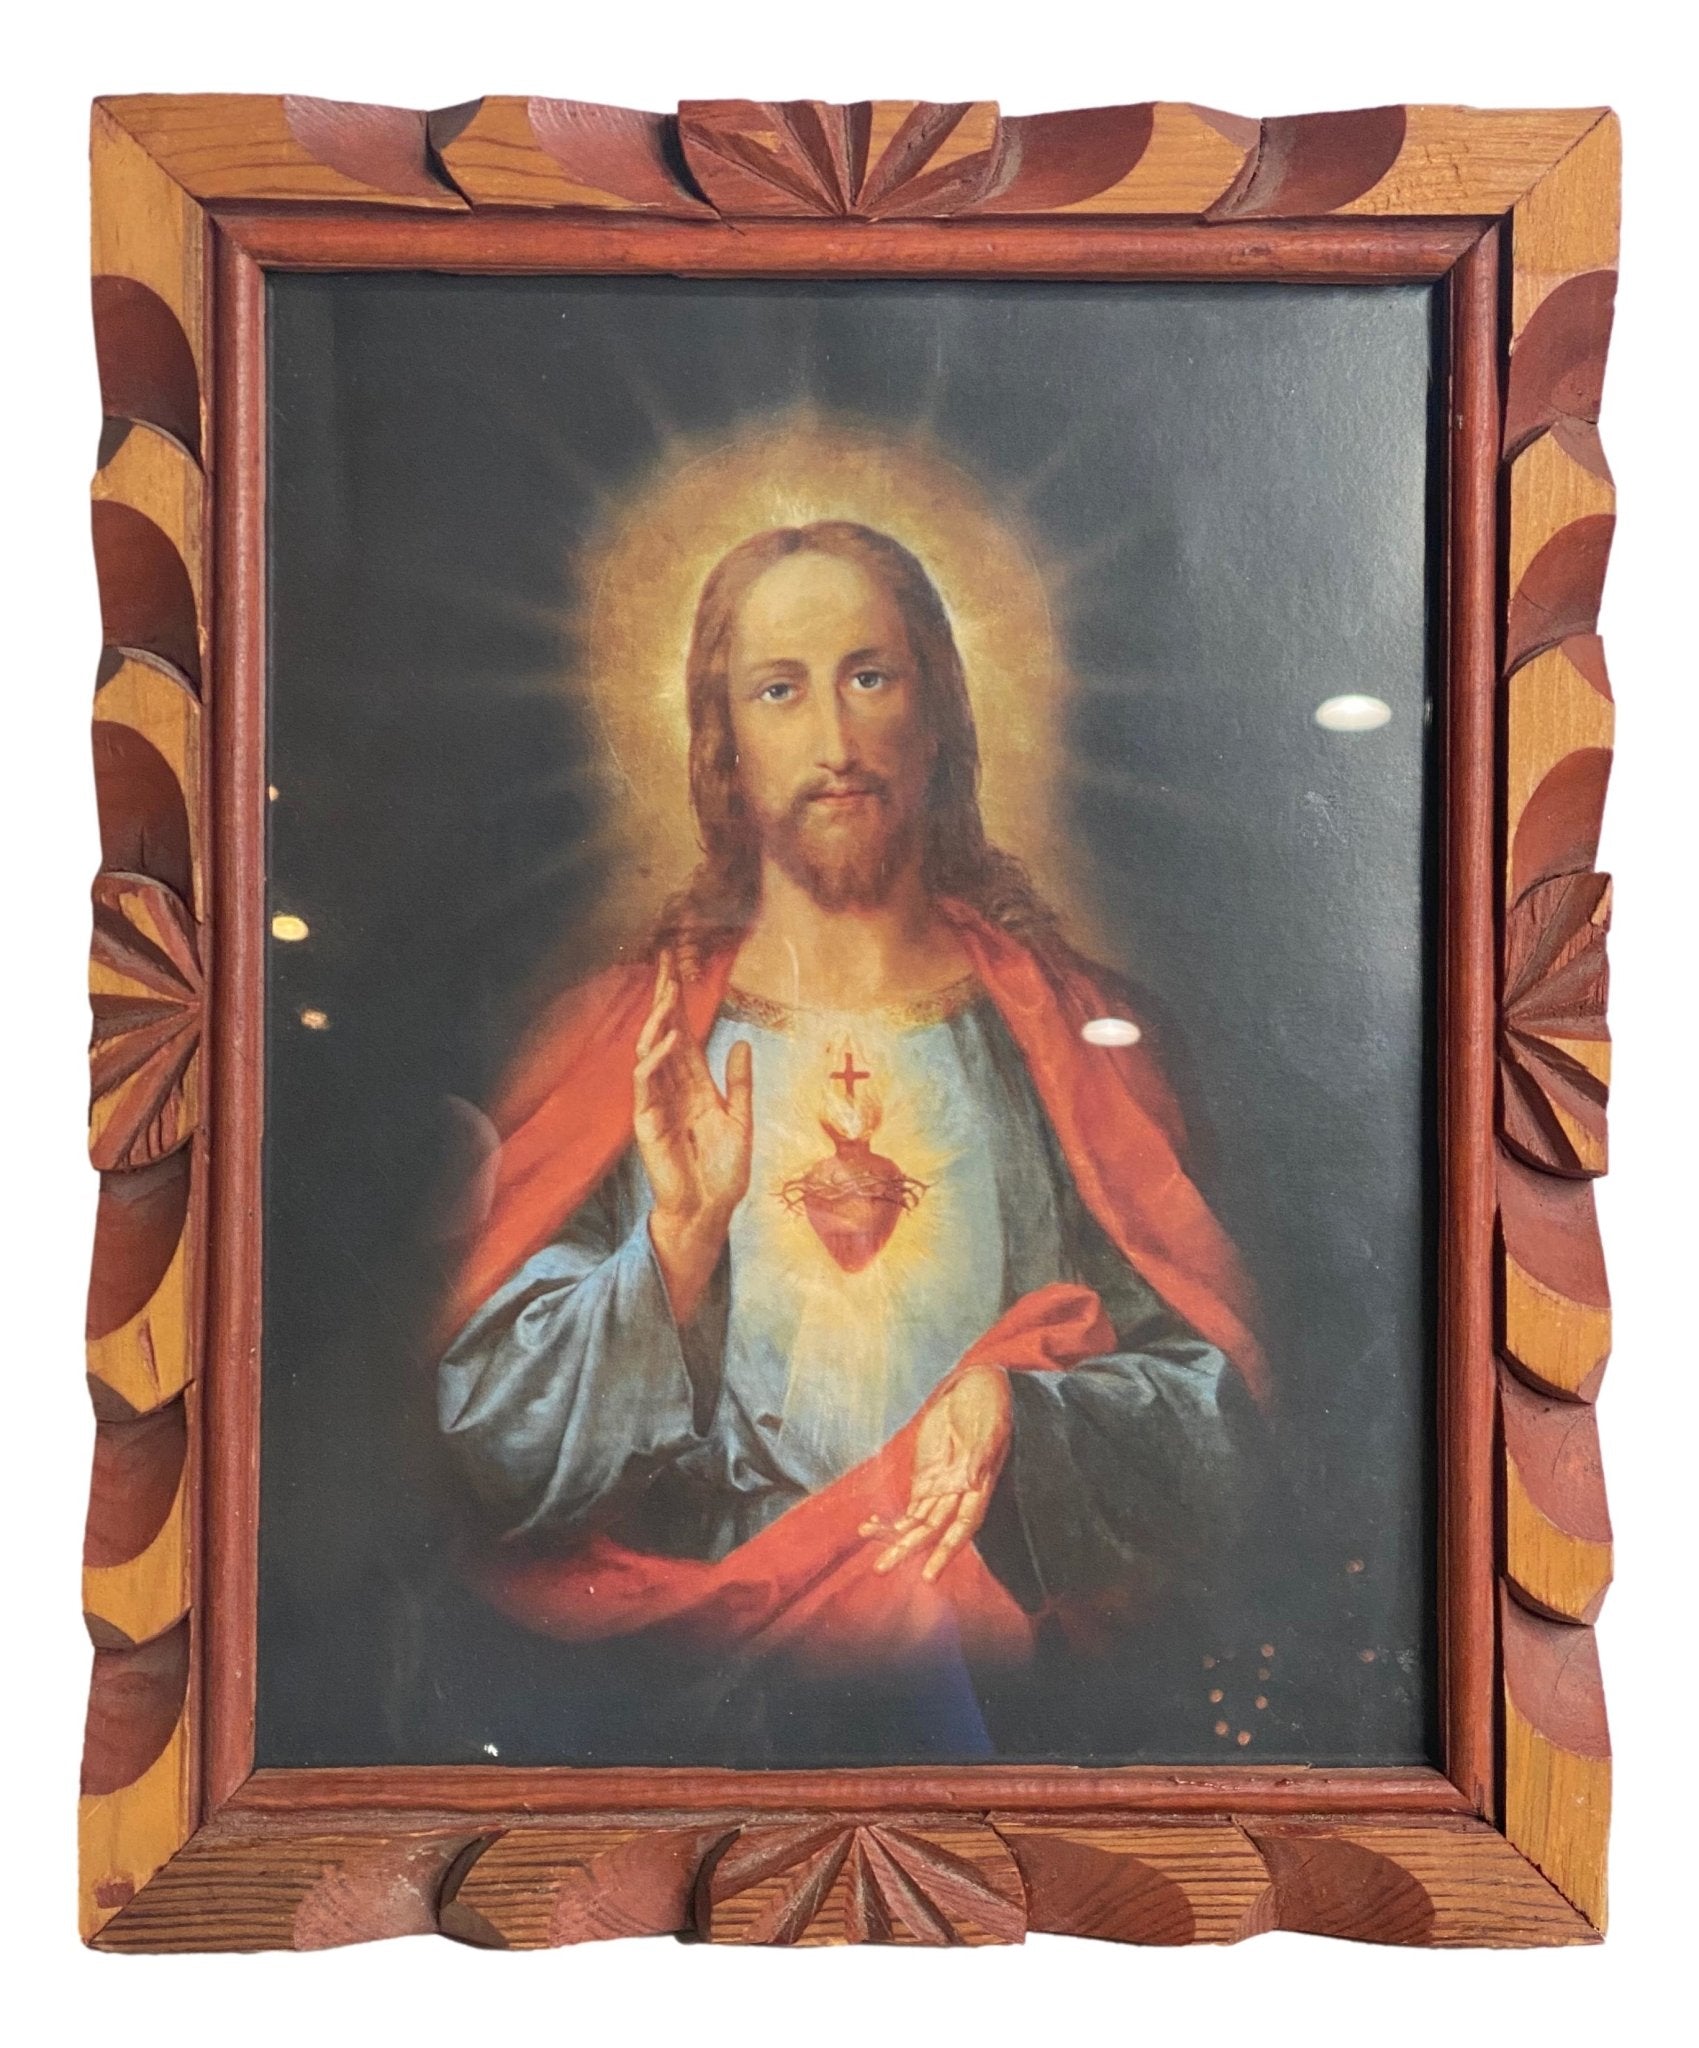 Frame Carved Wood Sacred Heart Color Print Handcrafted by Local Artisan 9 1/2 L x 3/4 W x 11 1/2 H Inches - Ysleta Mission Gift Shop- VOTED 2022 El Paso's Best Gift Shop